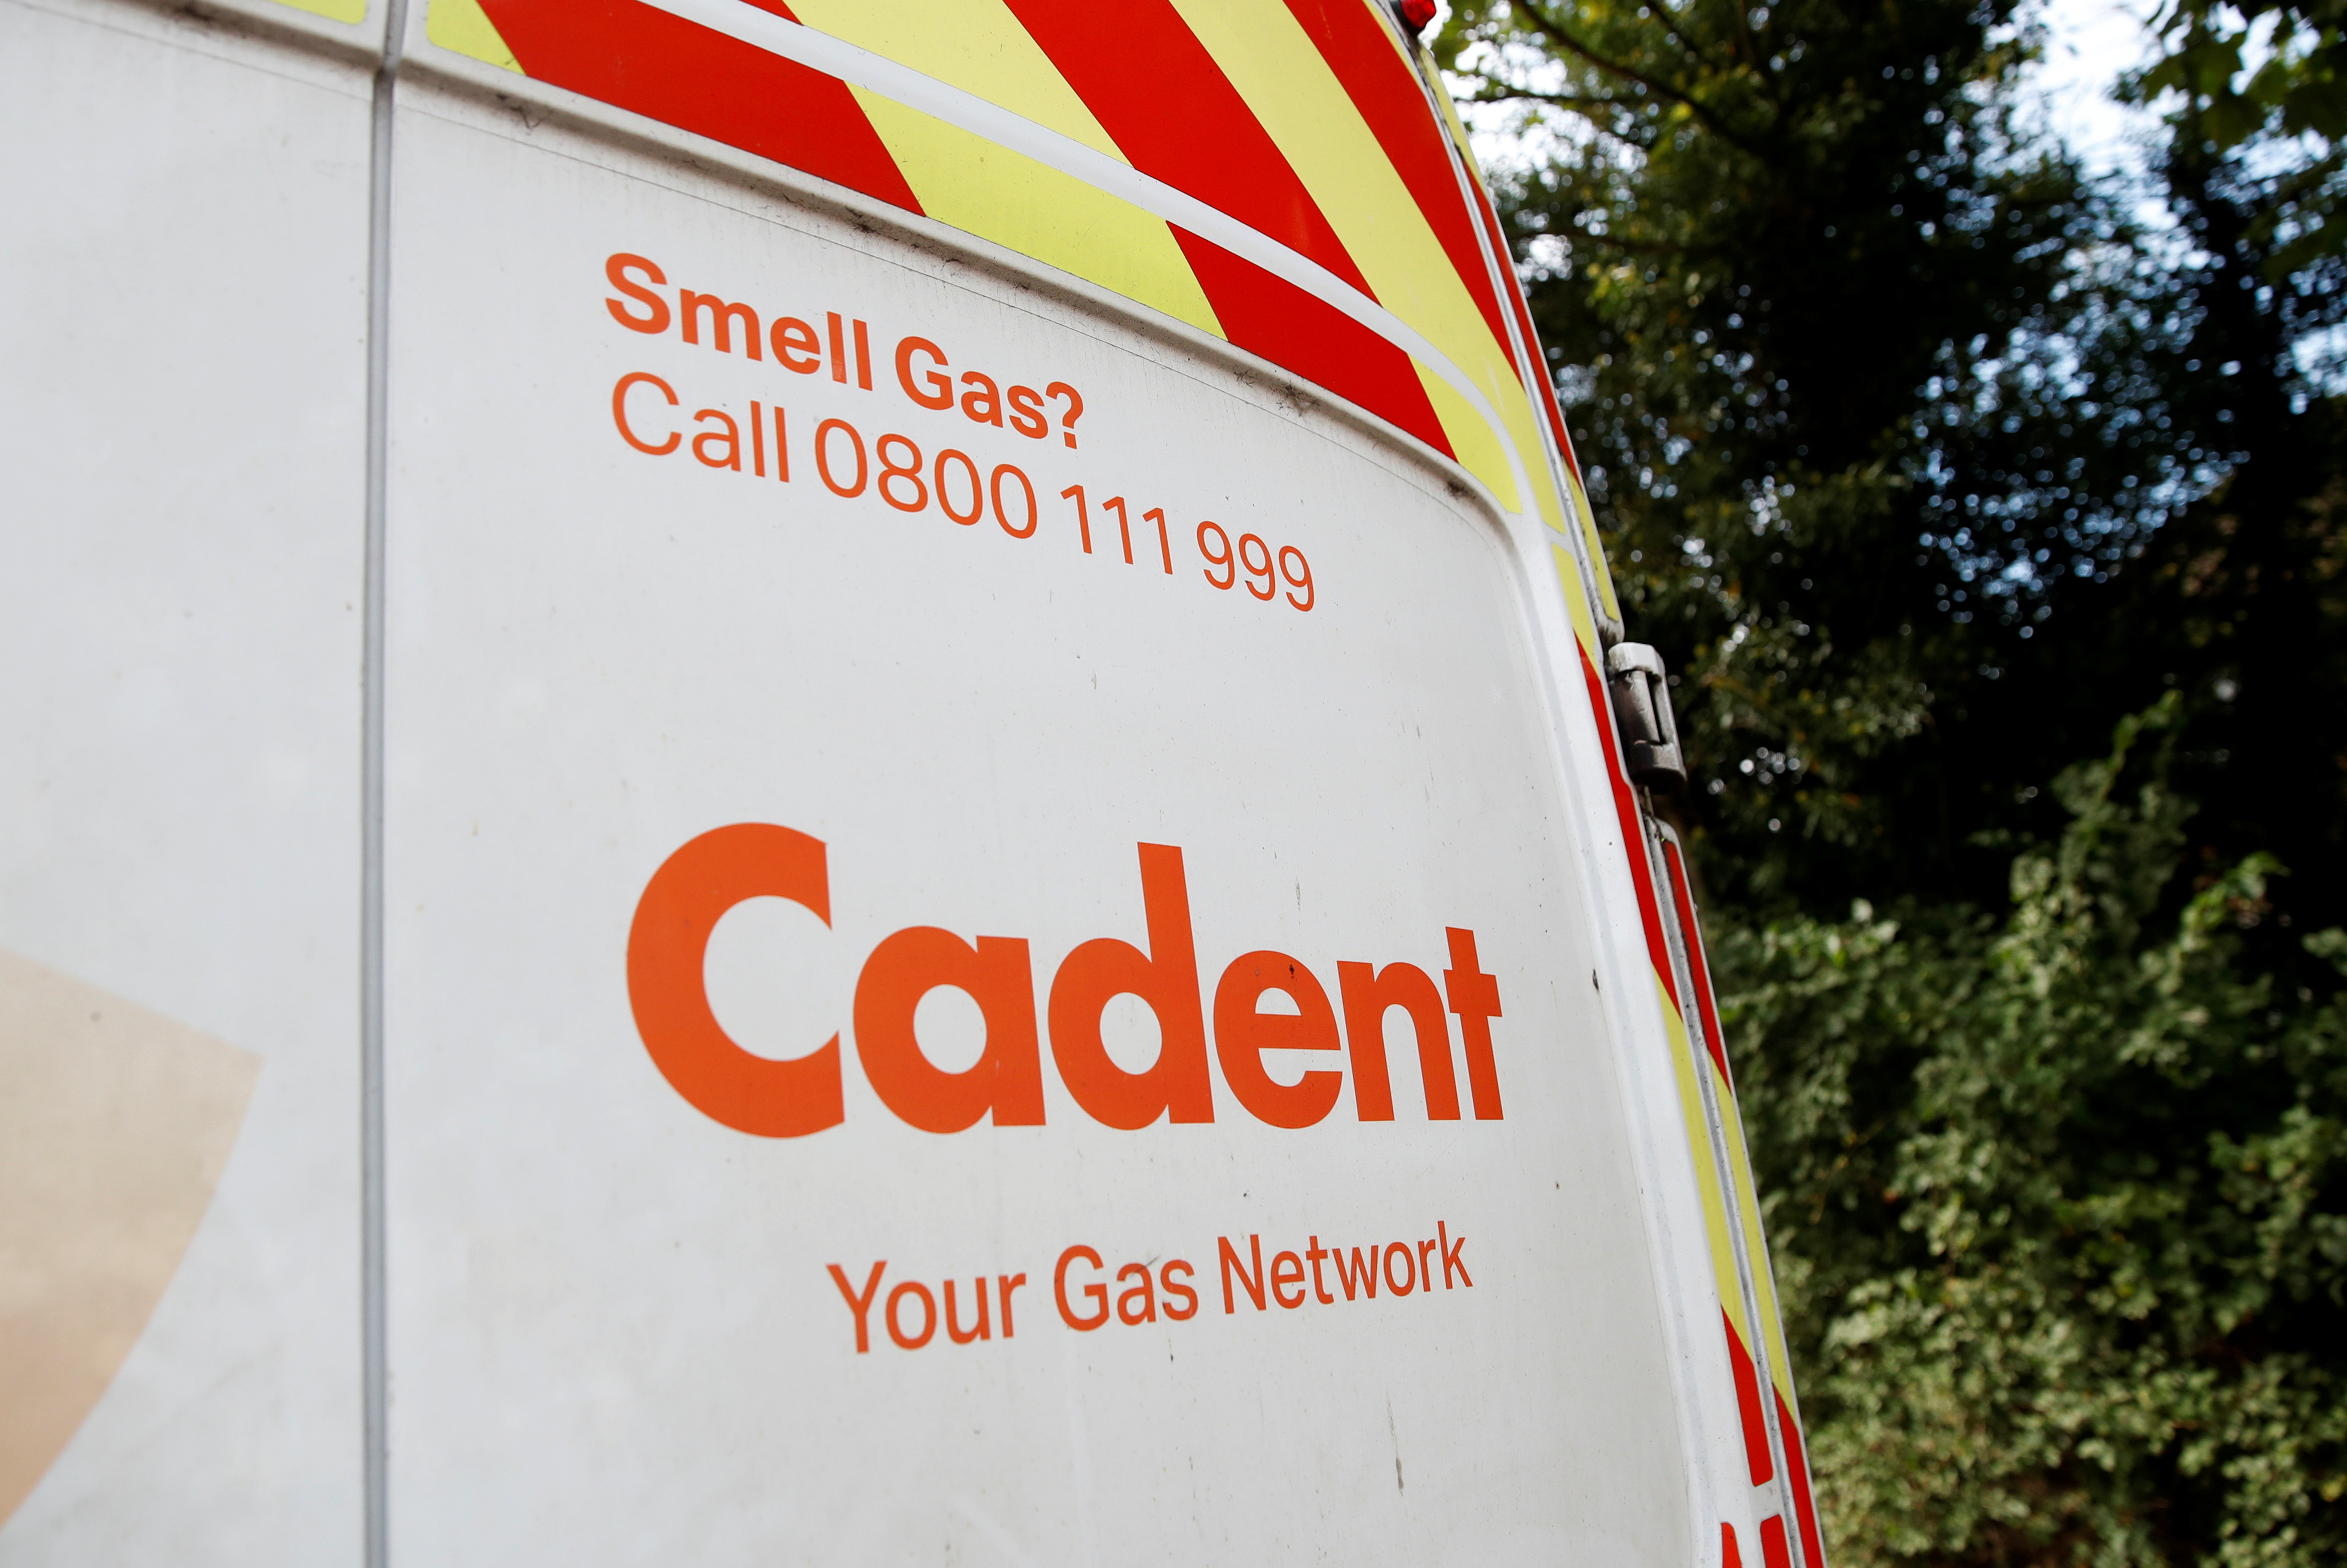 The logo of Cadent gas company is seen on a van in Redbourn